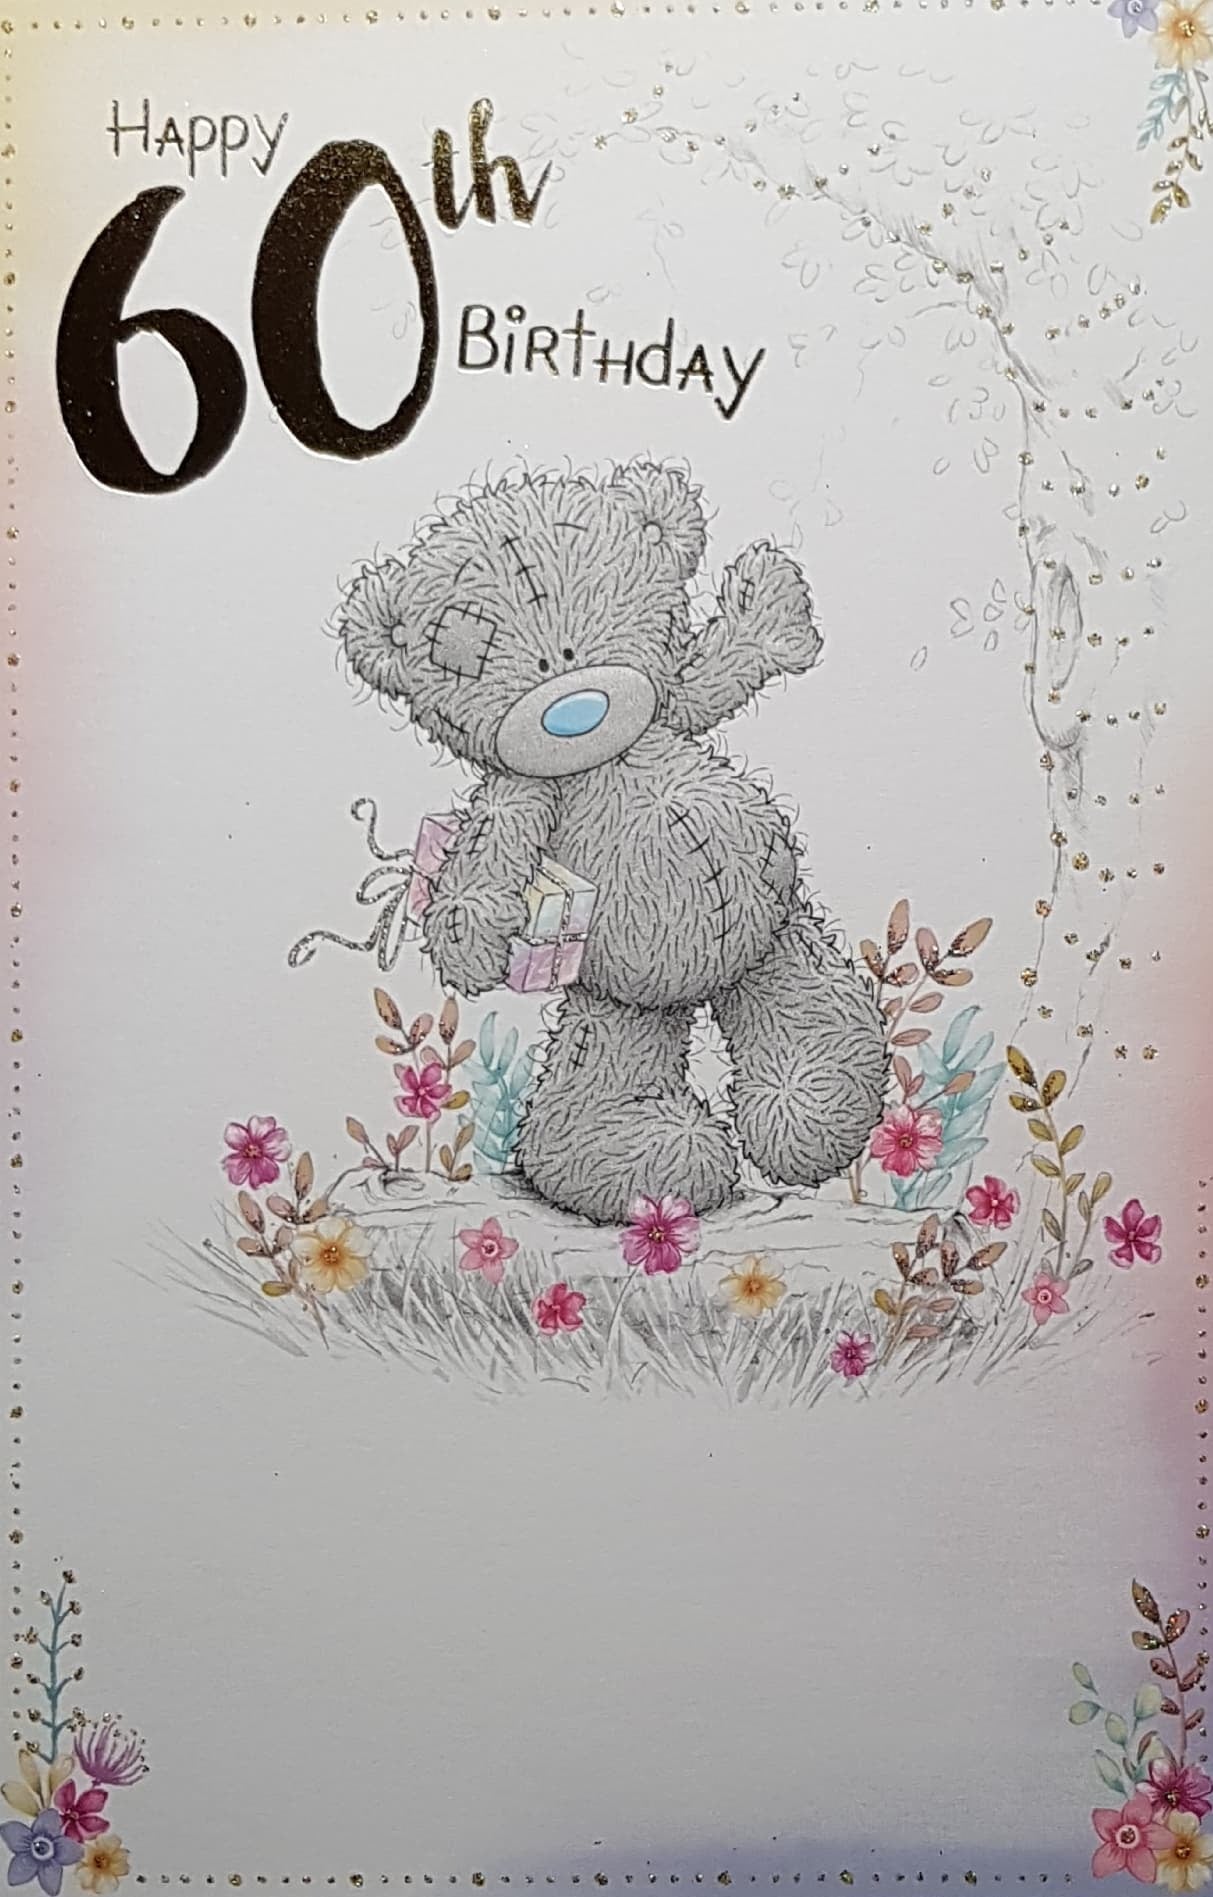 Age 60 Birthday Card - Cute Teddy Stumbling Through A Flower Bed With A Pink Gift